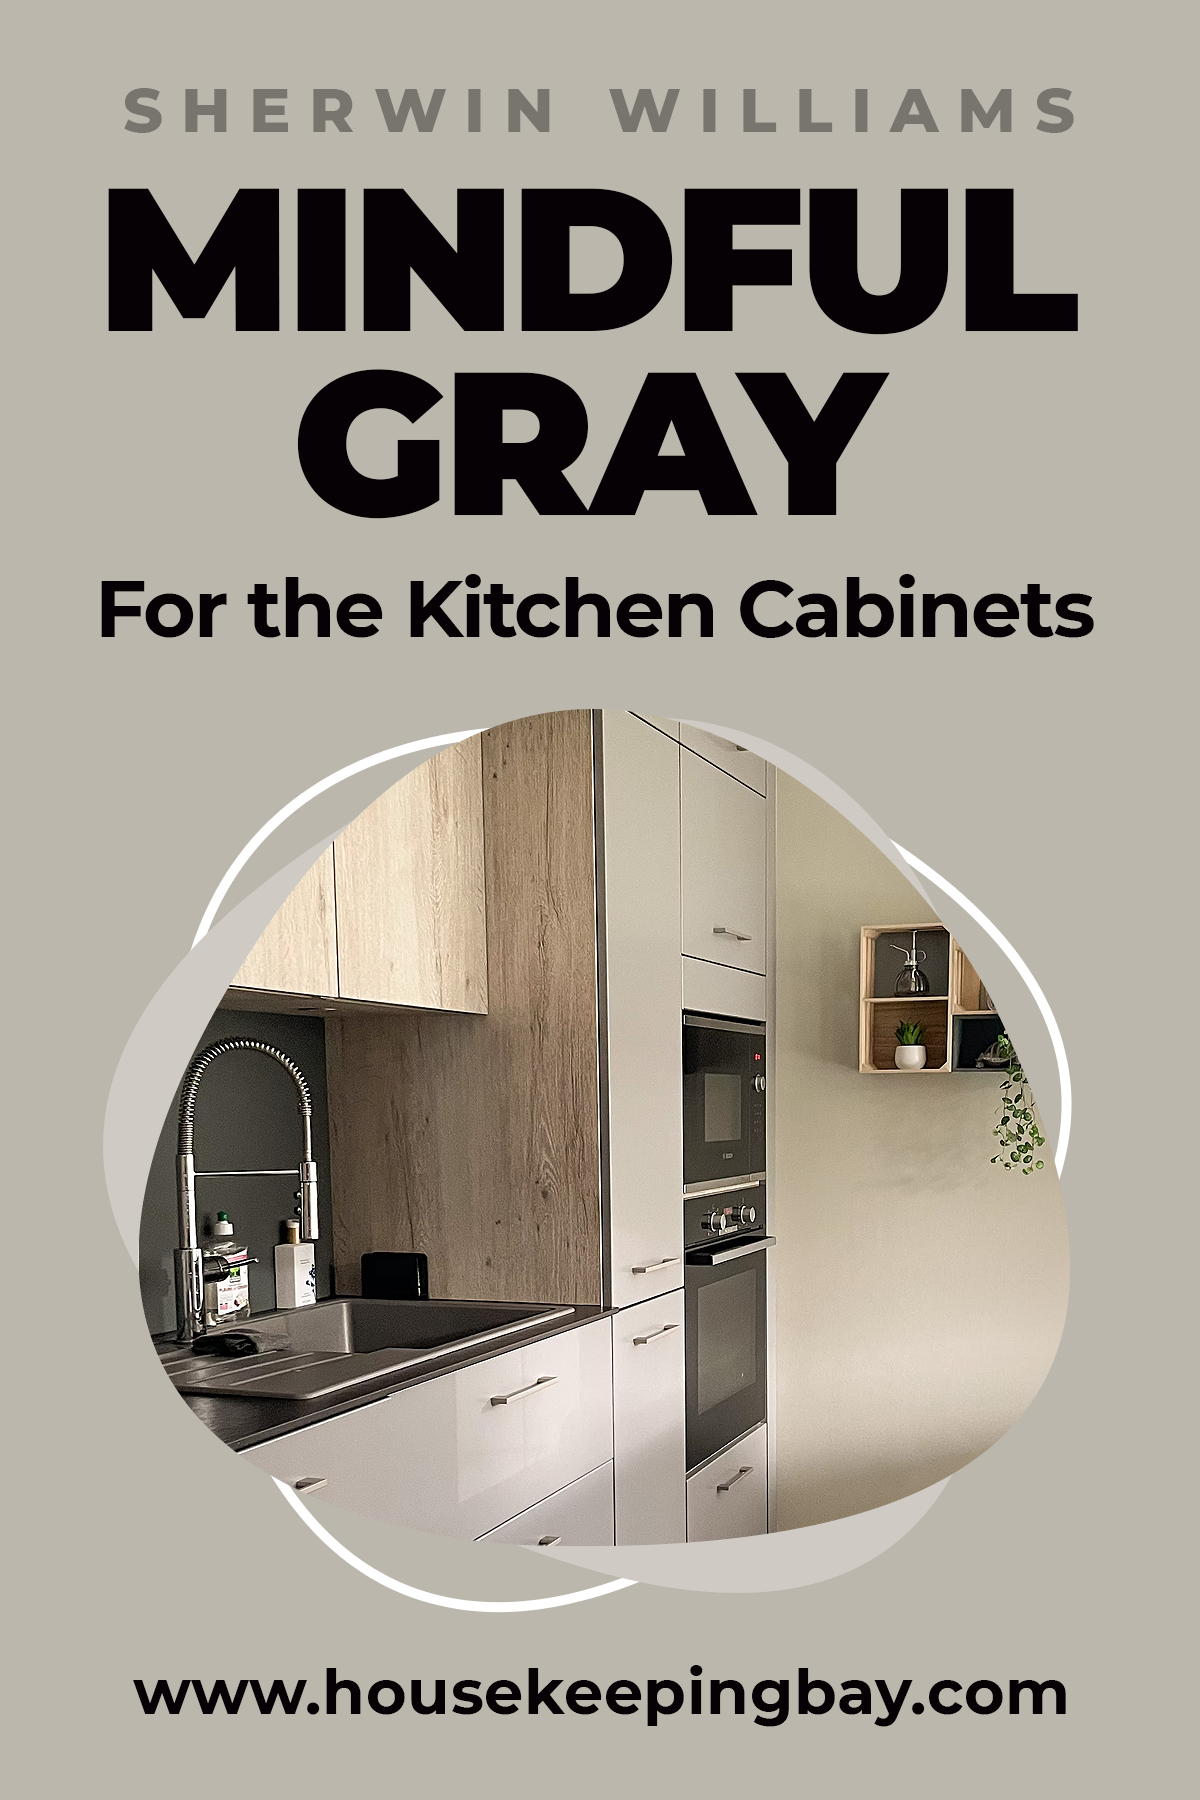 Mindful Gray for the Kitchen Cabinets